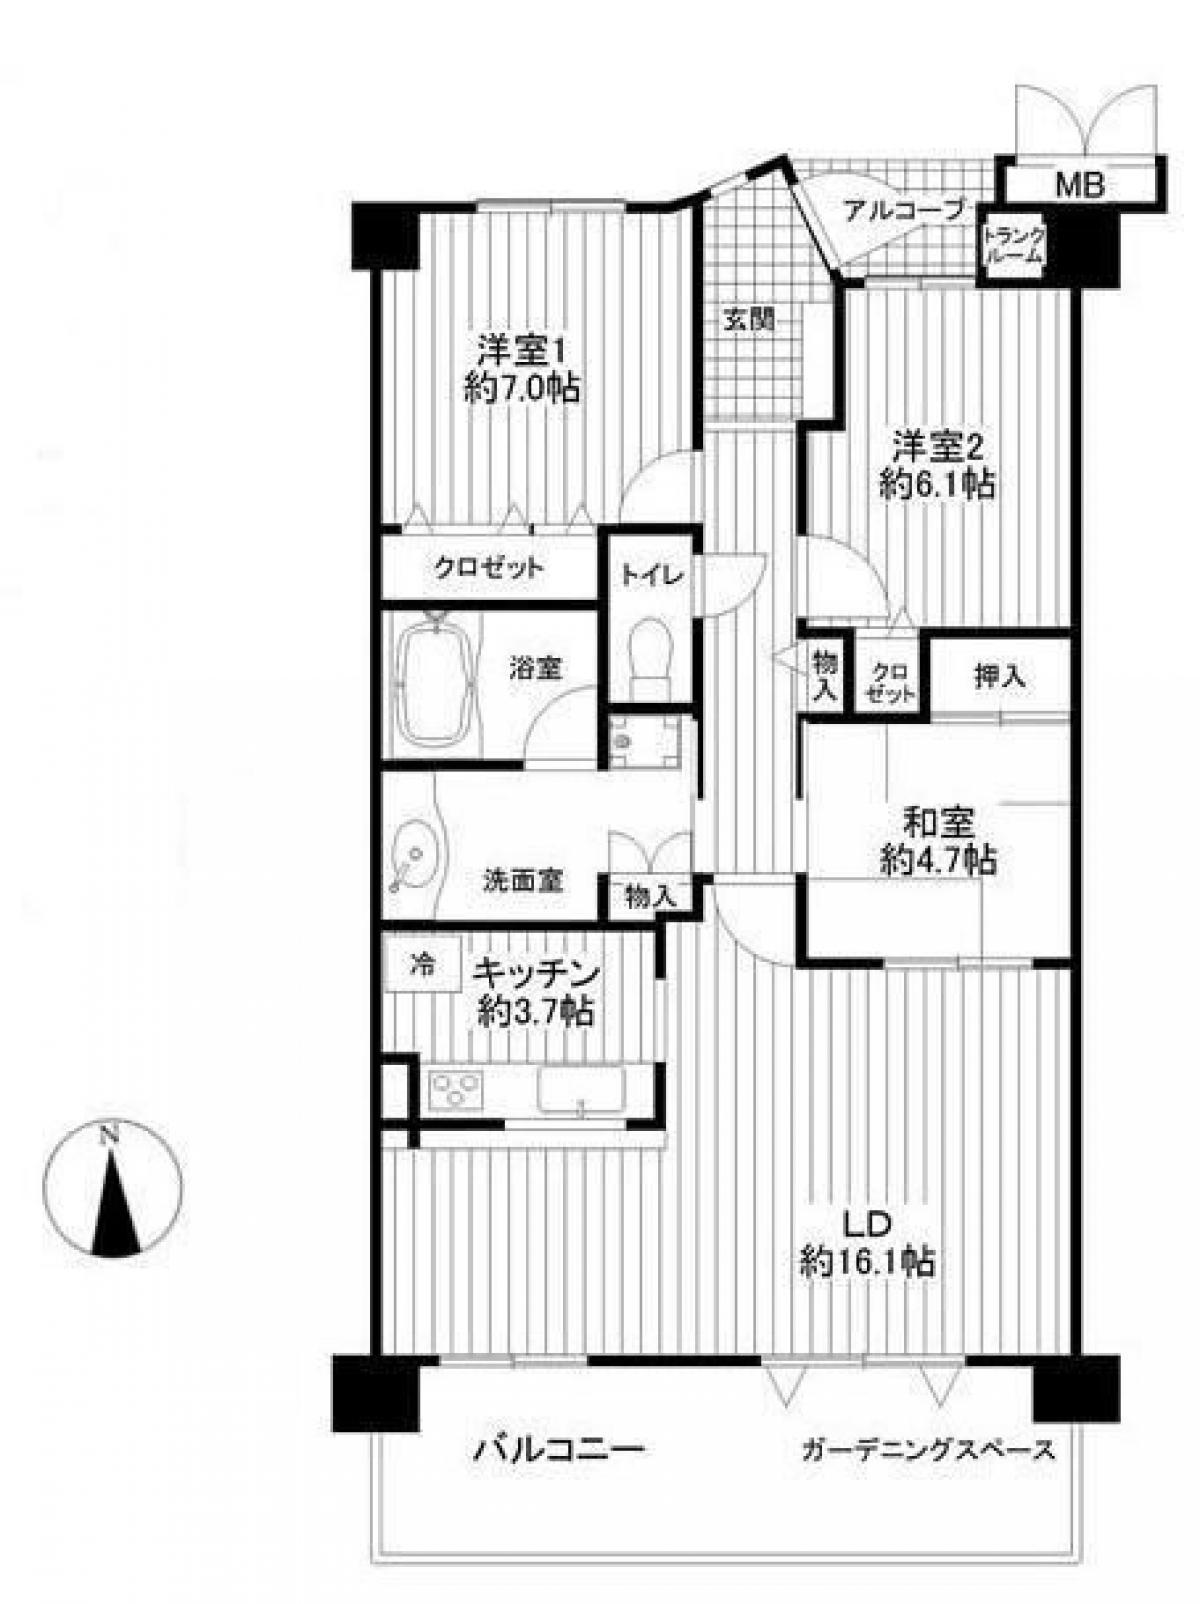 Picture of Apartment For Sale in Yachiyo Shi, Chiba, Japan